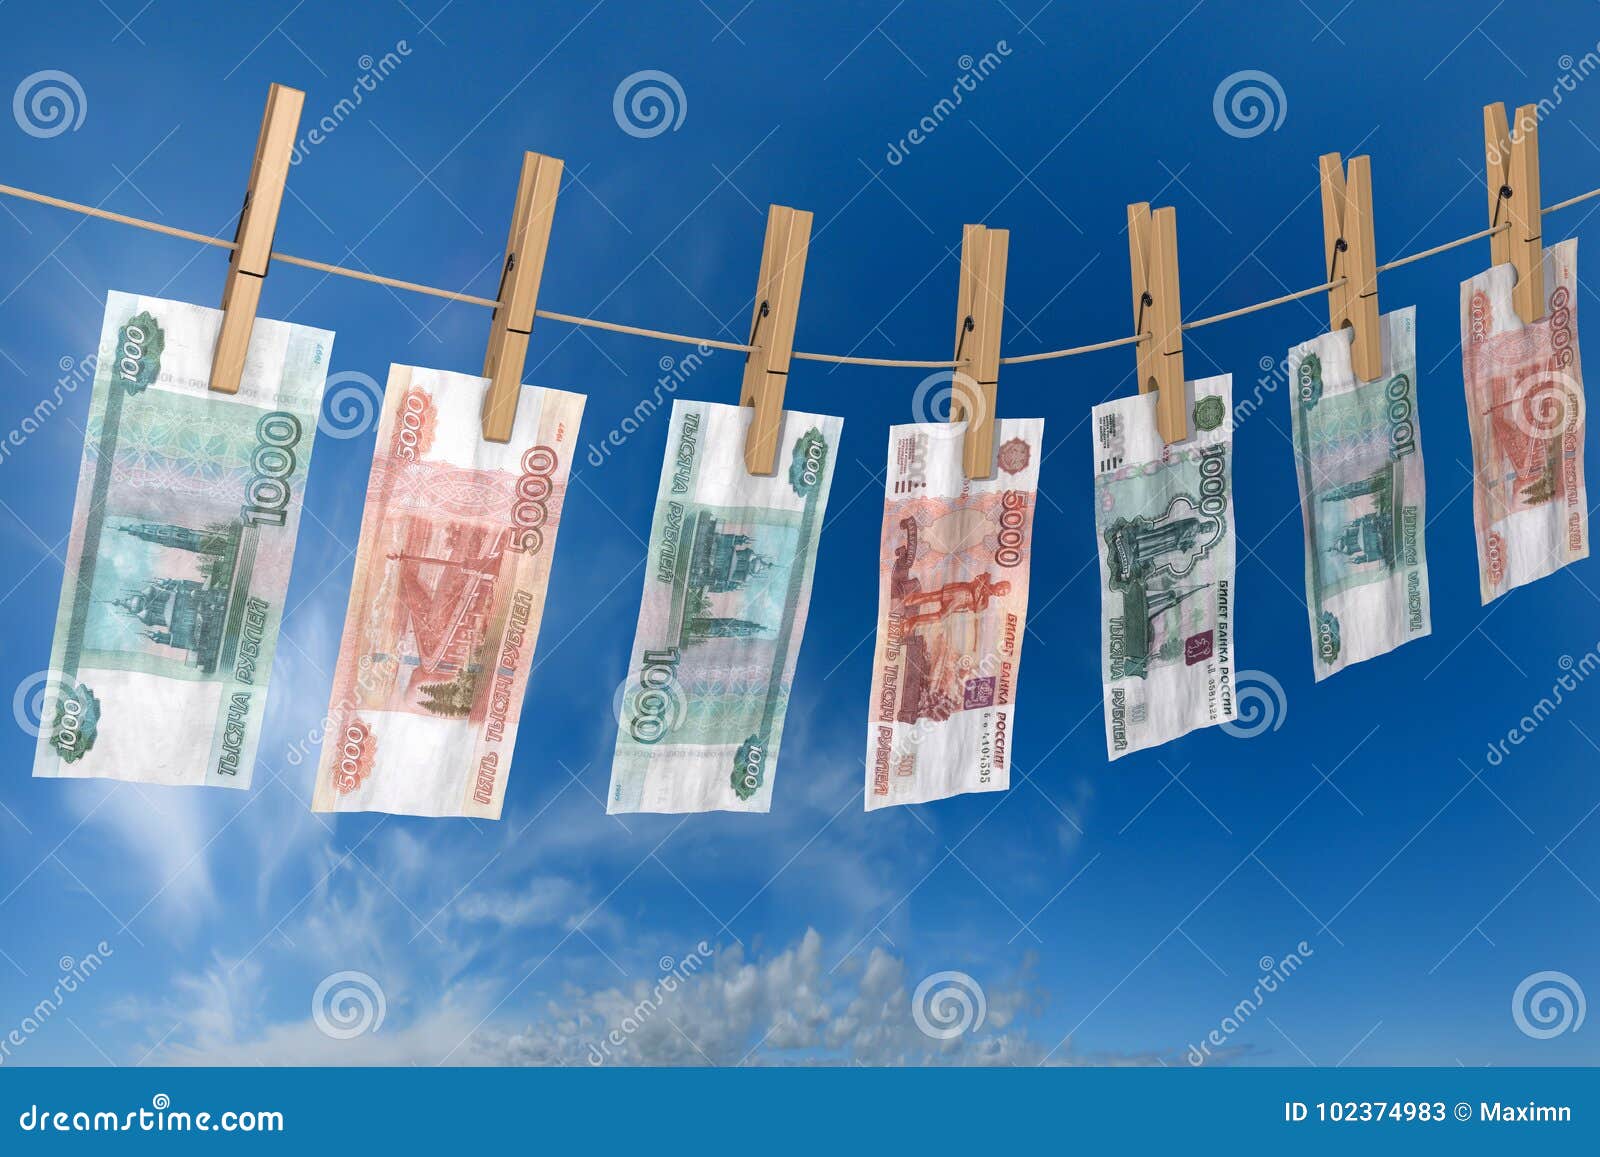 crumpled banknote of roubles to dry on the rope clothes pins attached